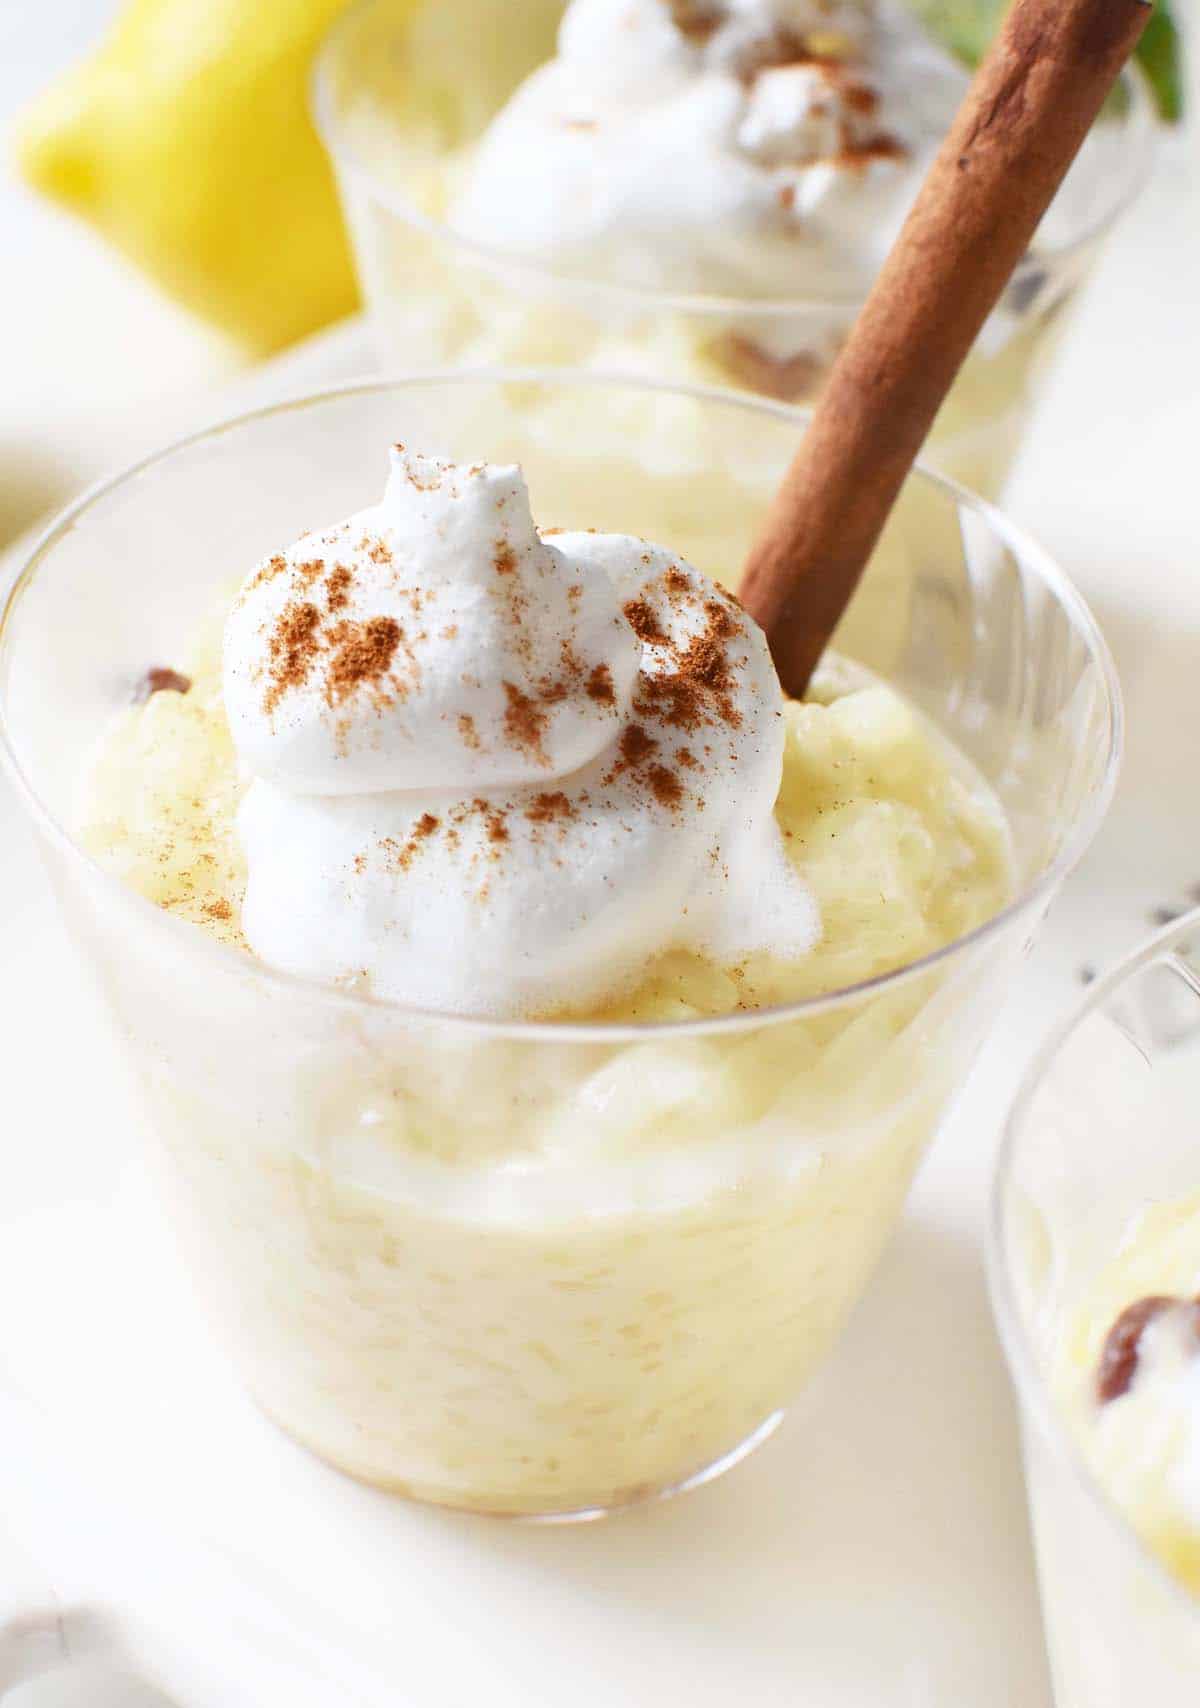 Lemon Rice Pudding with Cinnamon Sticks and whipped cream.